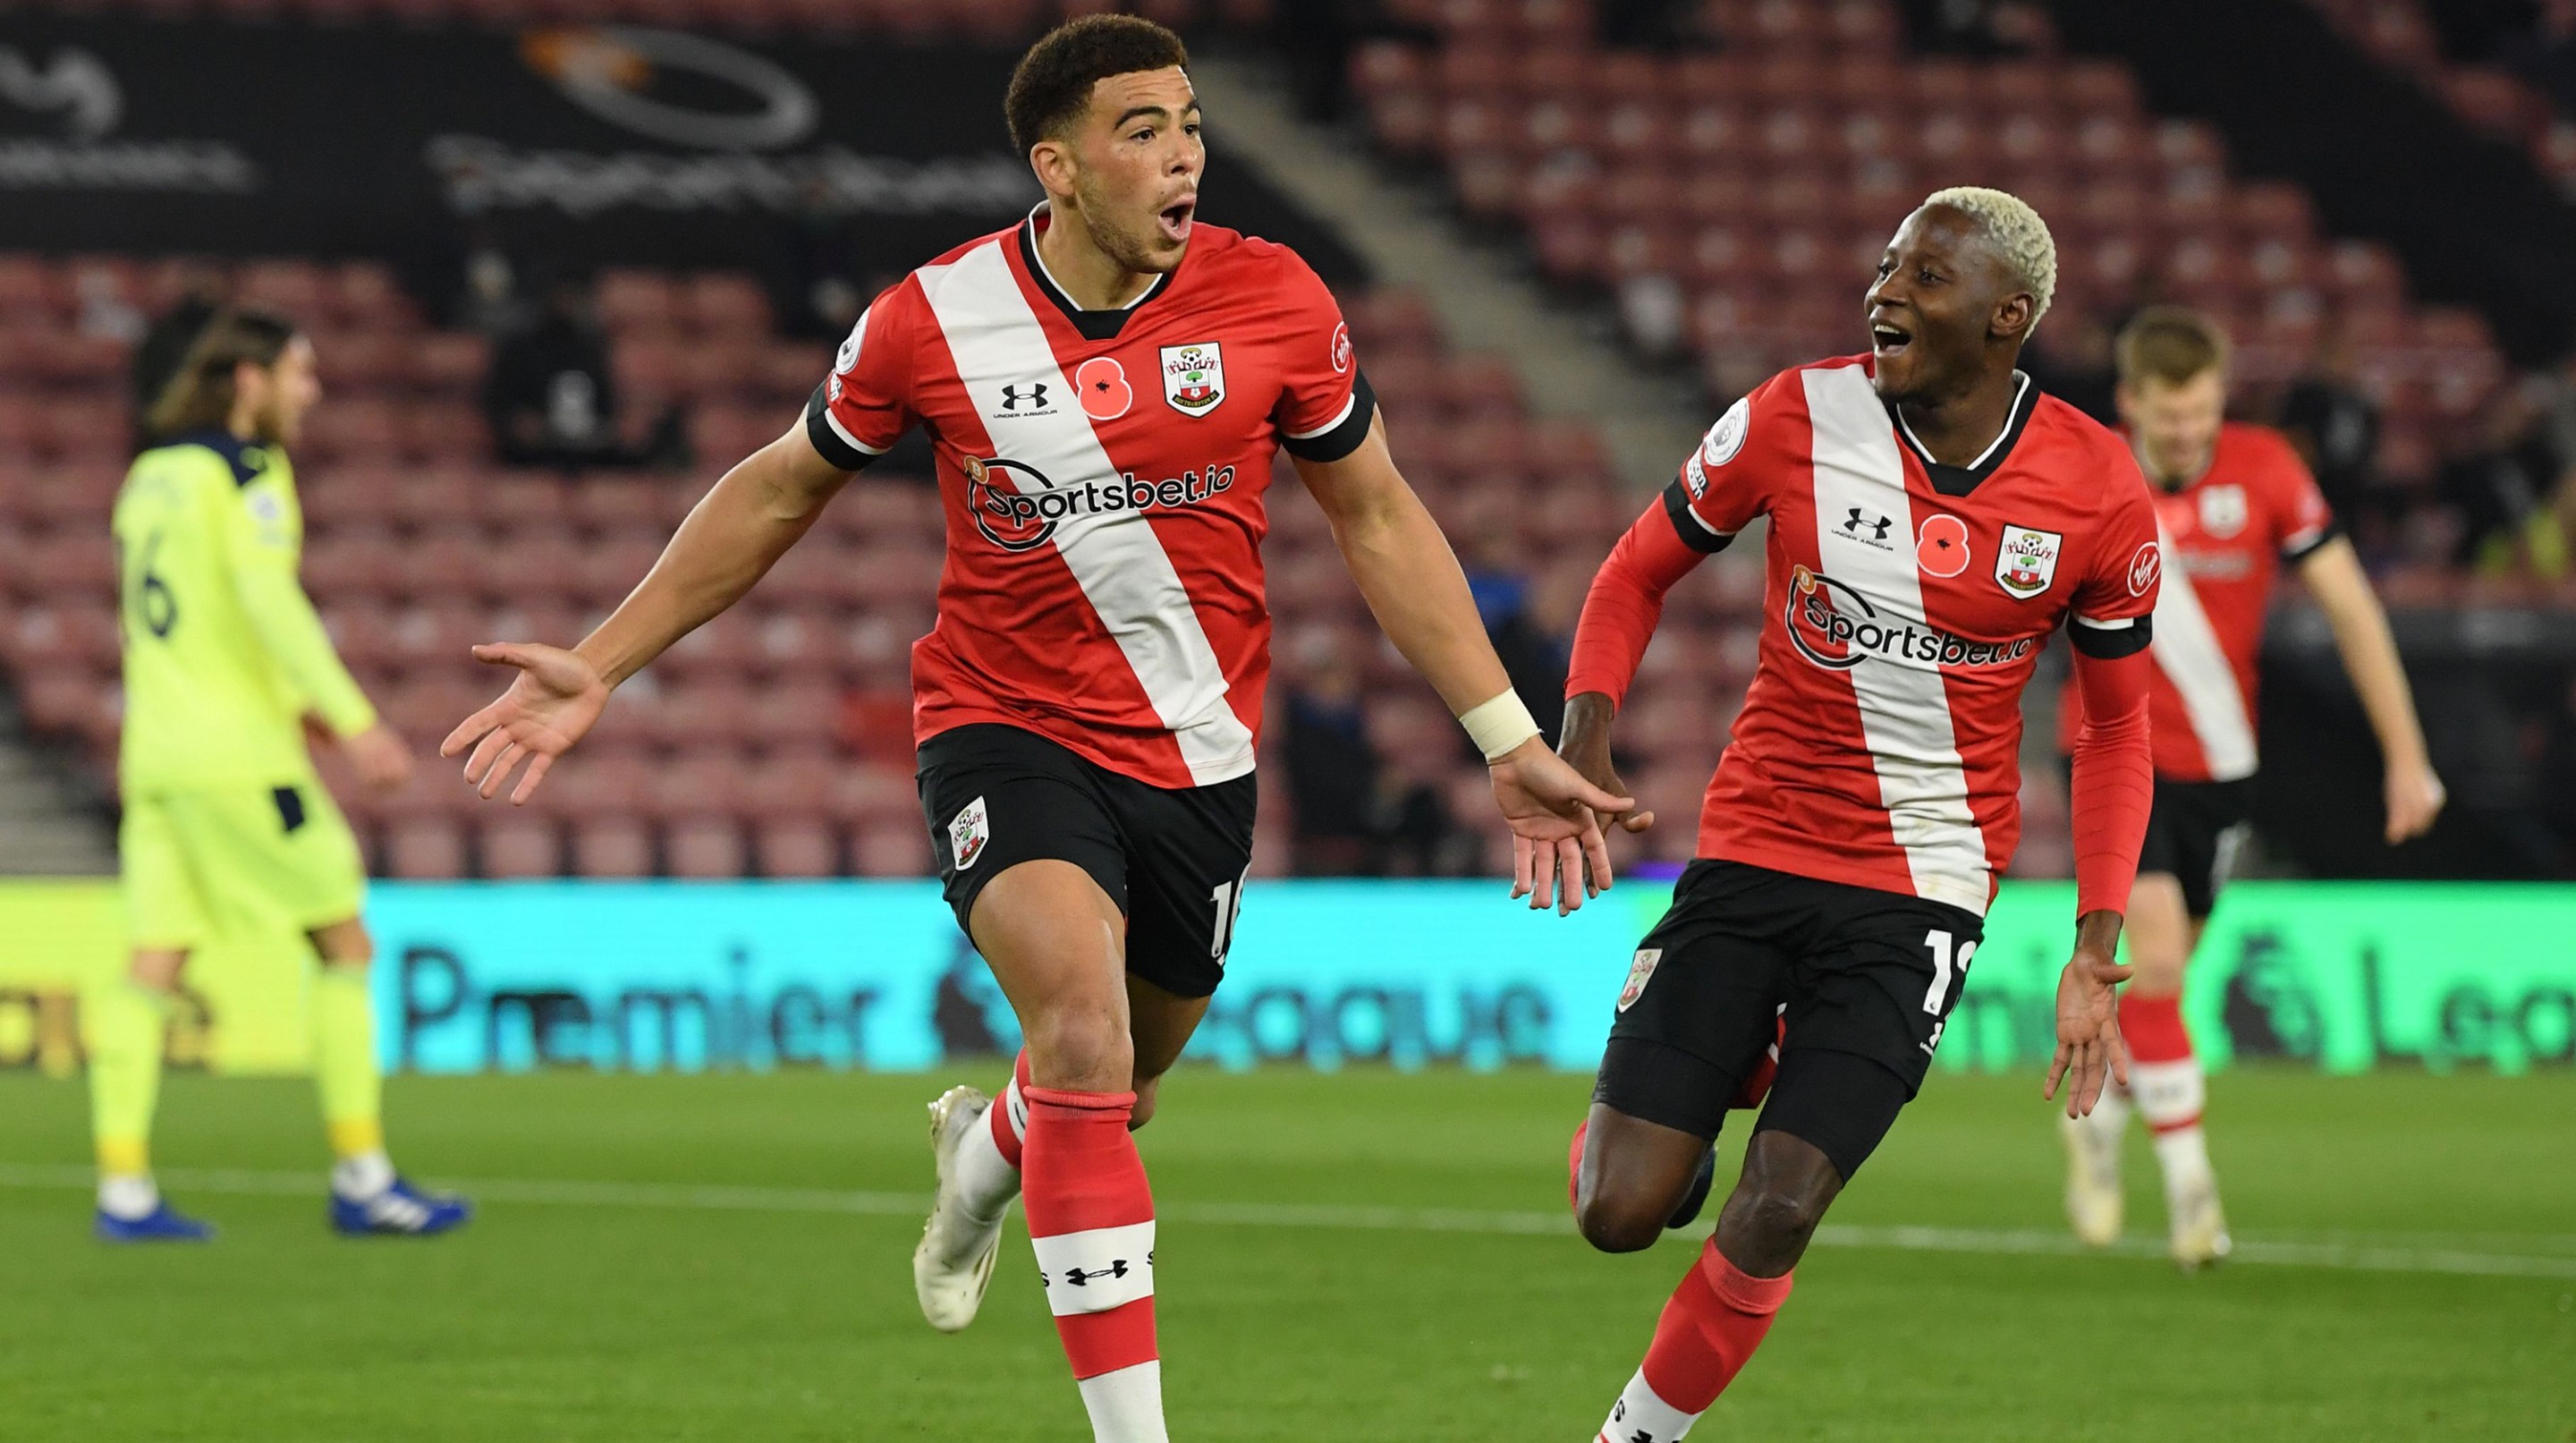 Southampton's English midfielder Che Adams celebrates scoring his team's first goal during the English Premier League football match between Southampton and Newcastle United at St Mary's Stadium in Southampton, southern England on November 6, 2020.